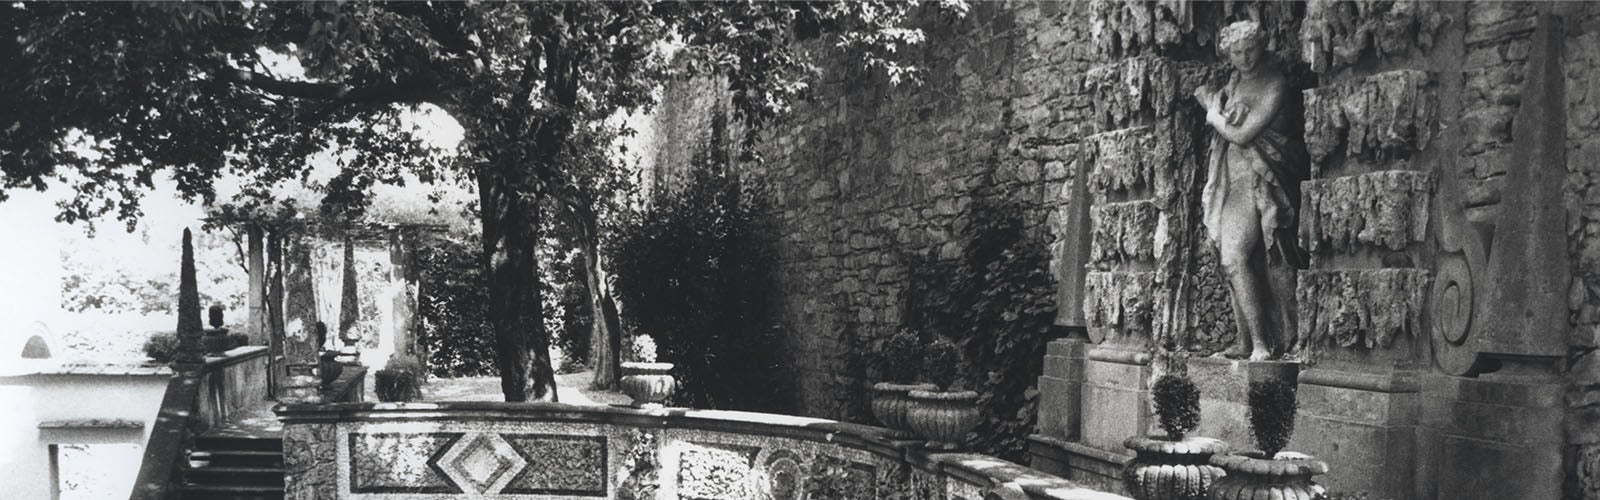 Black and white photo shows a stone staircase, trees, shrubbery, and statues set against one wall of an enclosed outdoor garden.